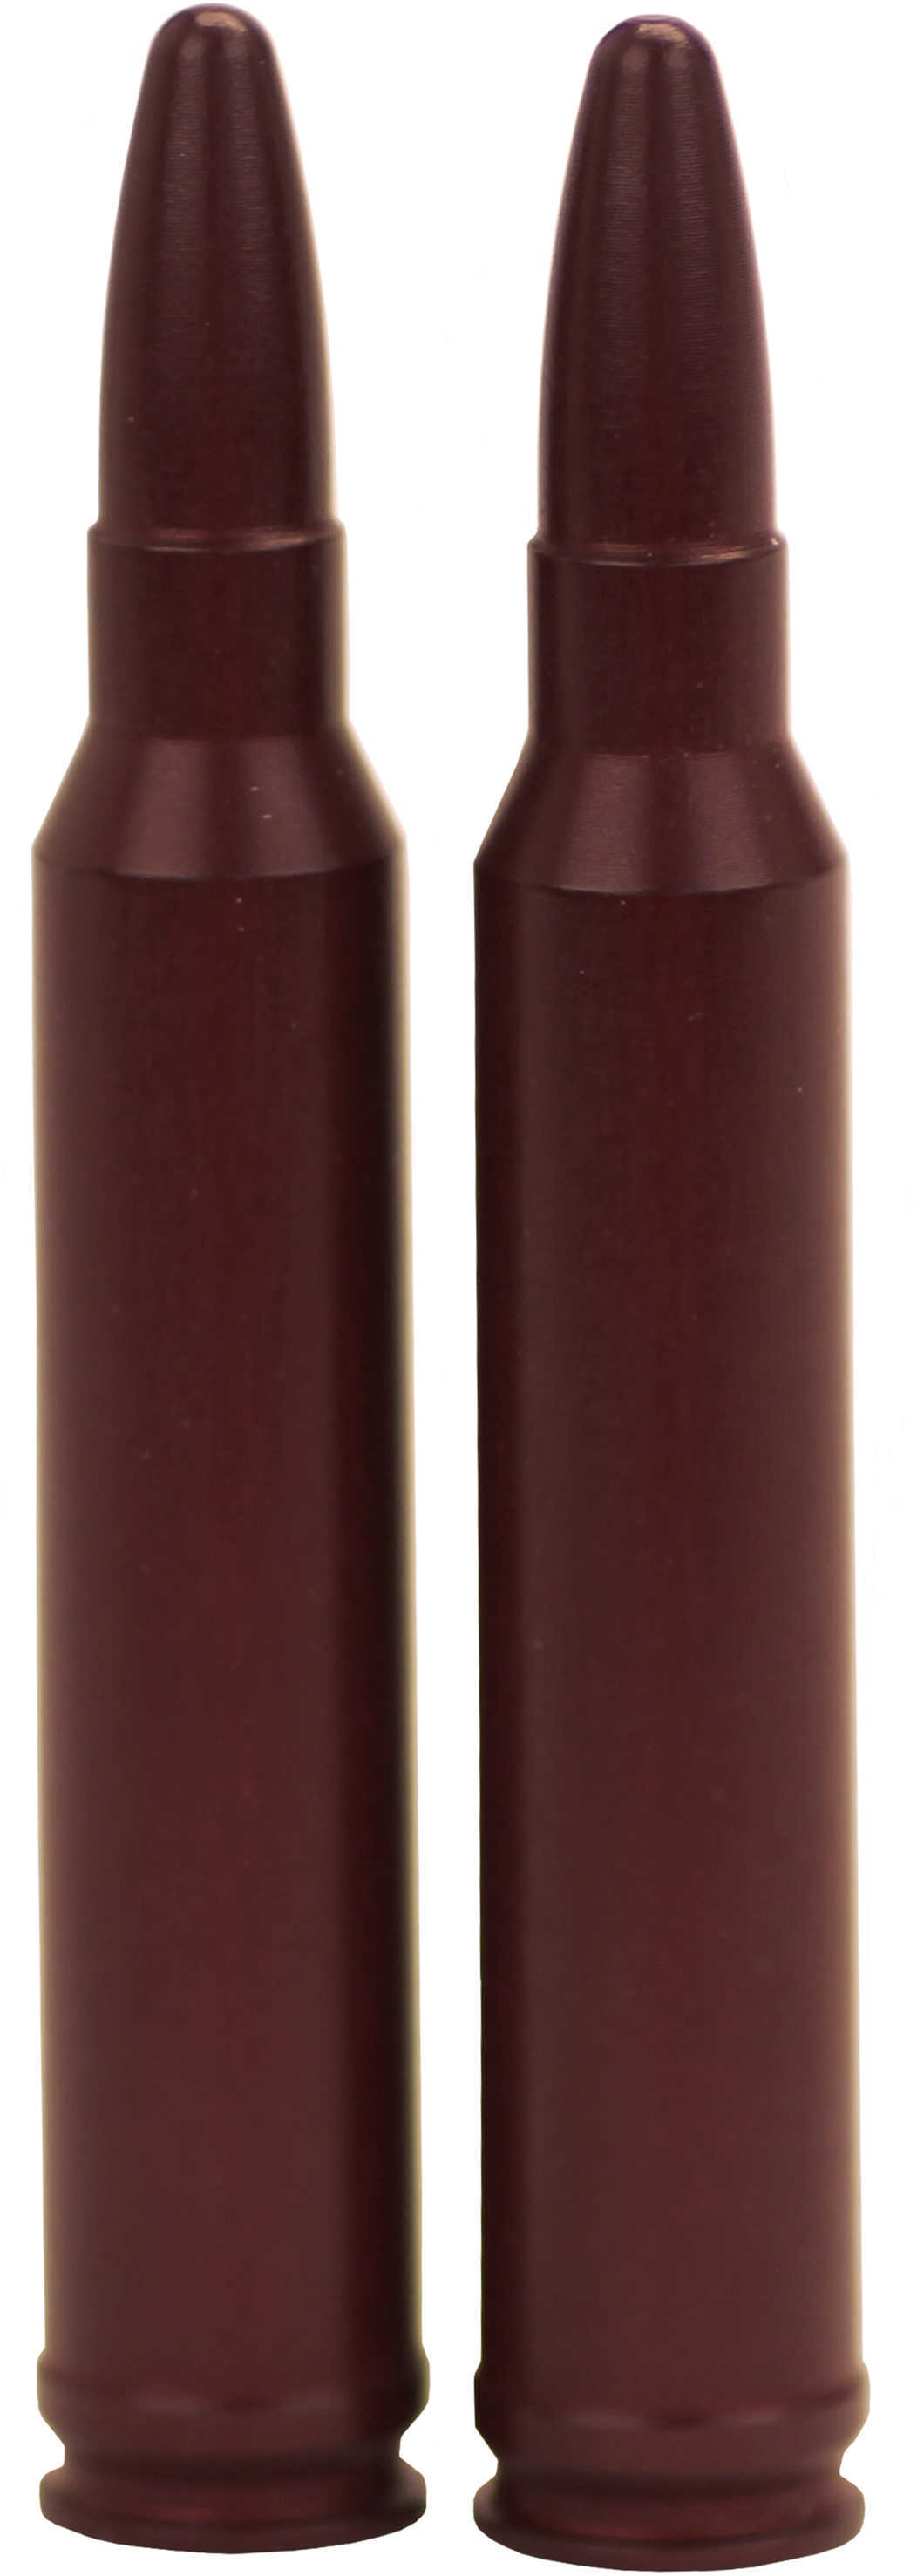 A-Zoom Precision Metal Snap Caps 300 Win Mag, 2 Per Pack For Safety Training, Function Testing Or safely decocking witho